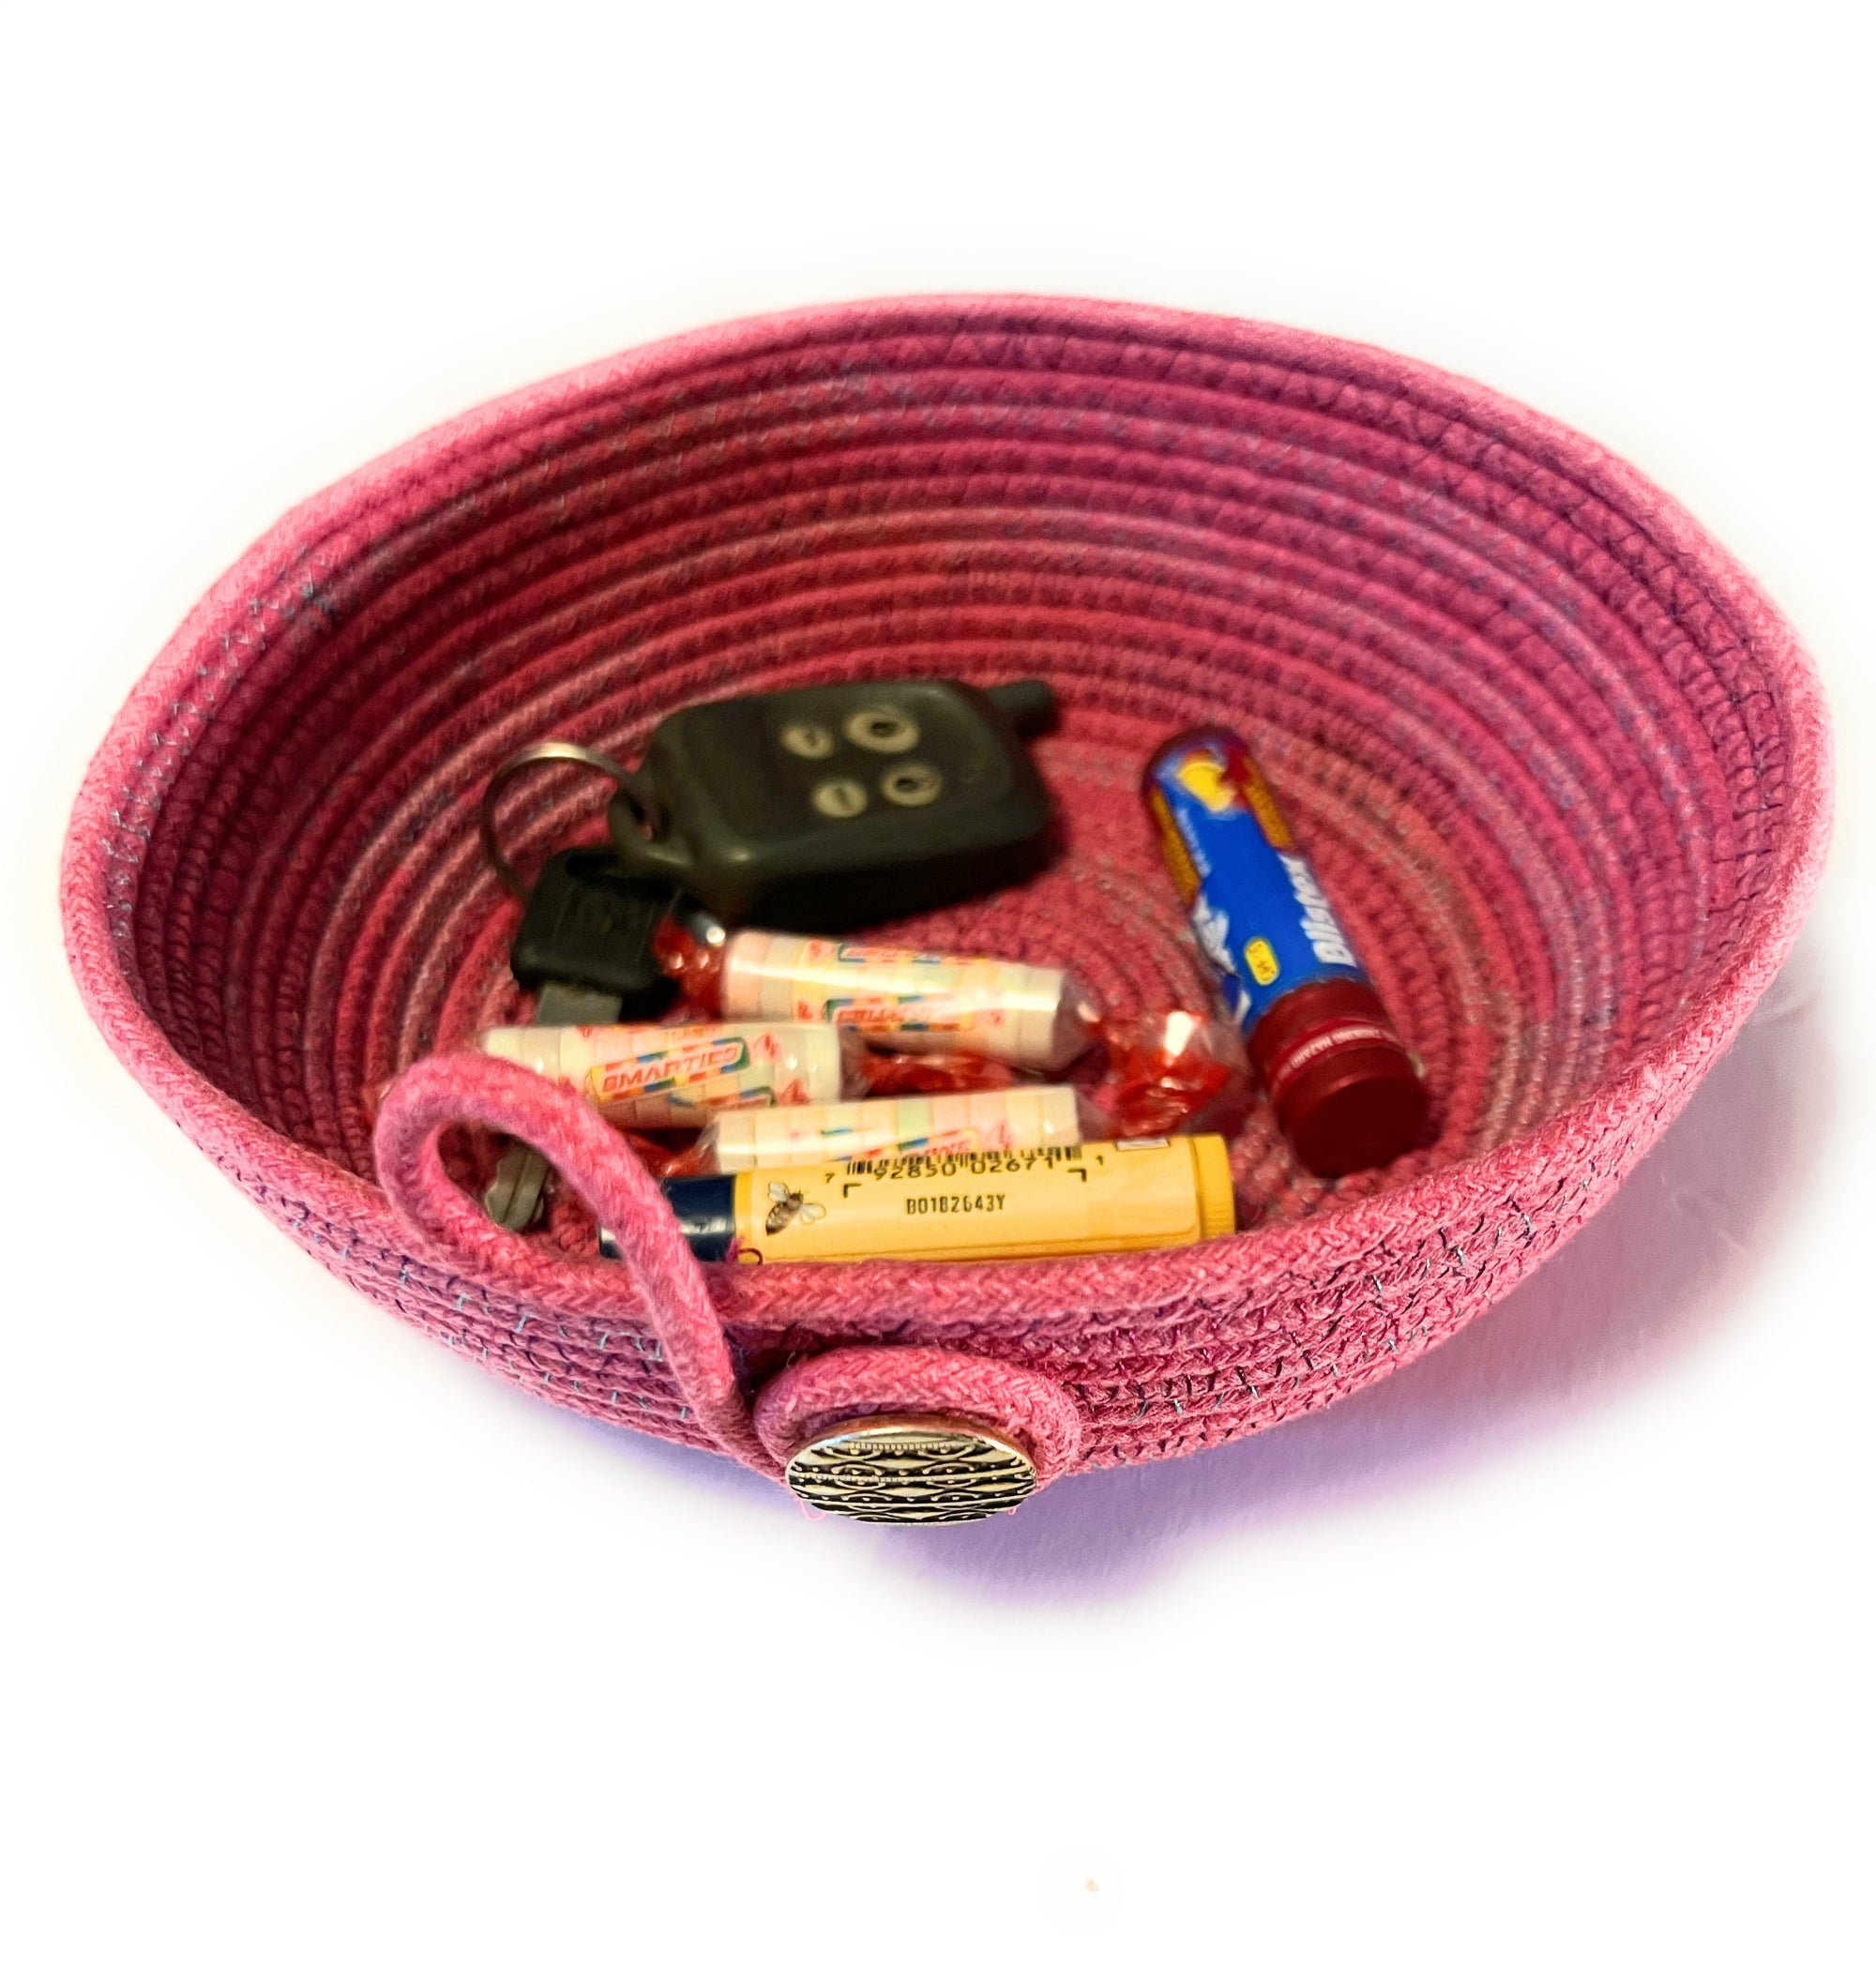 Coiled Rope Bowl in Pink with Silver Accent